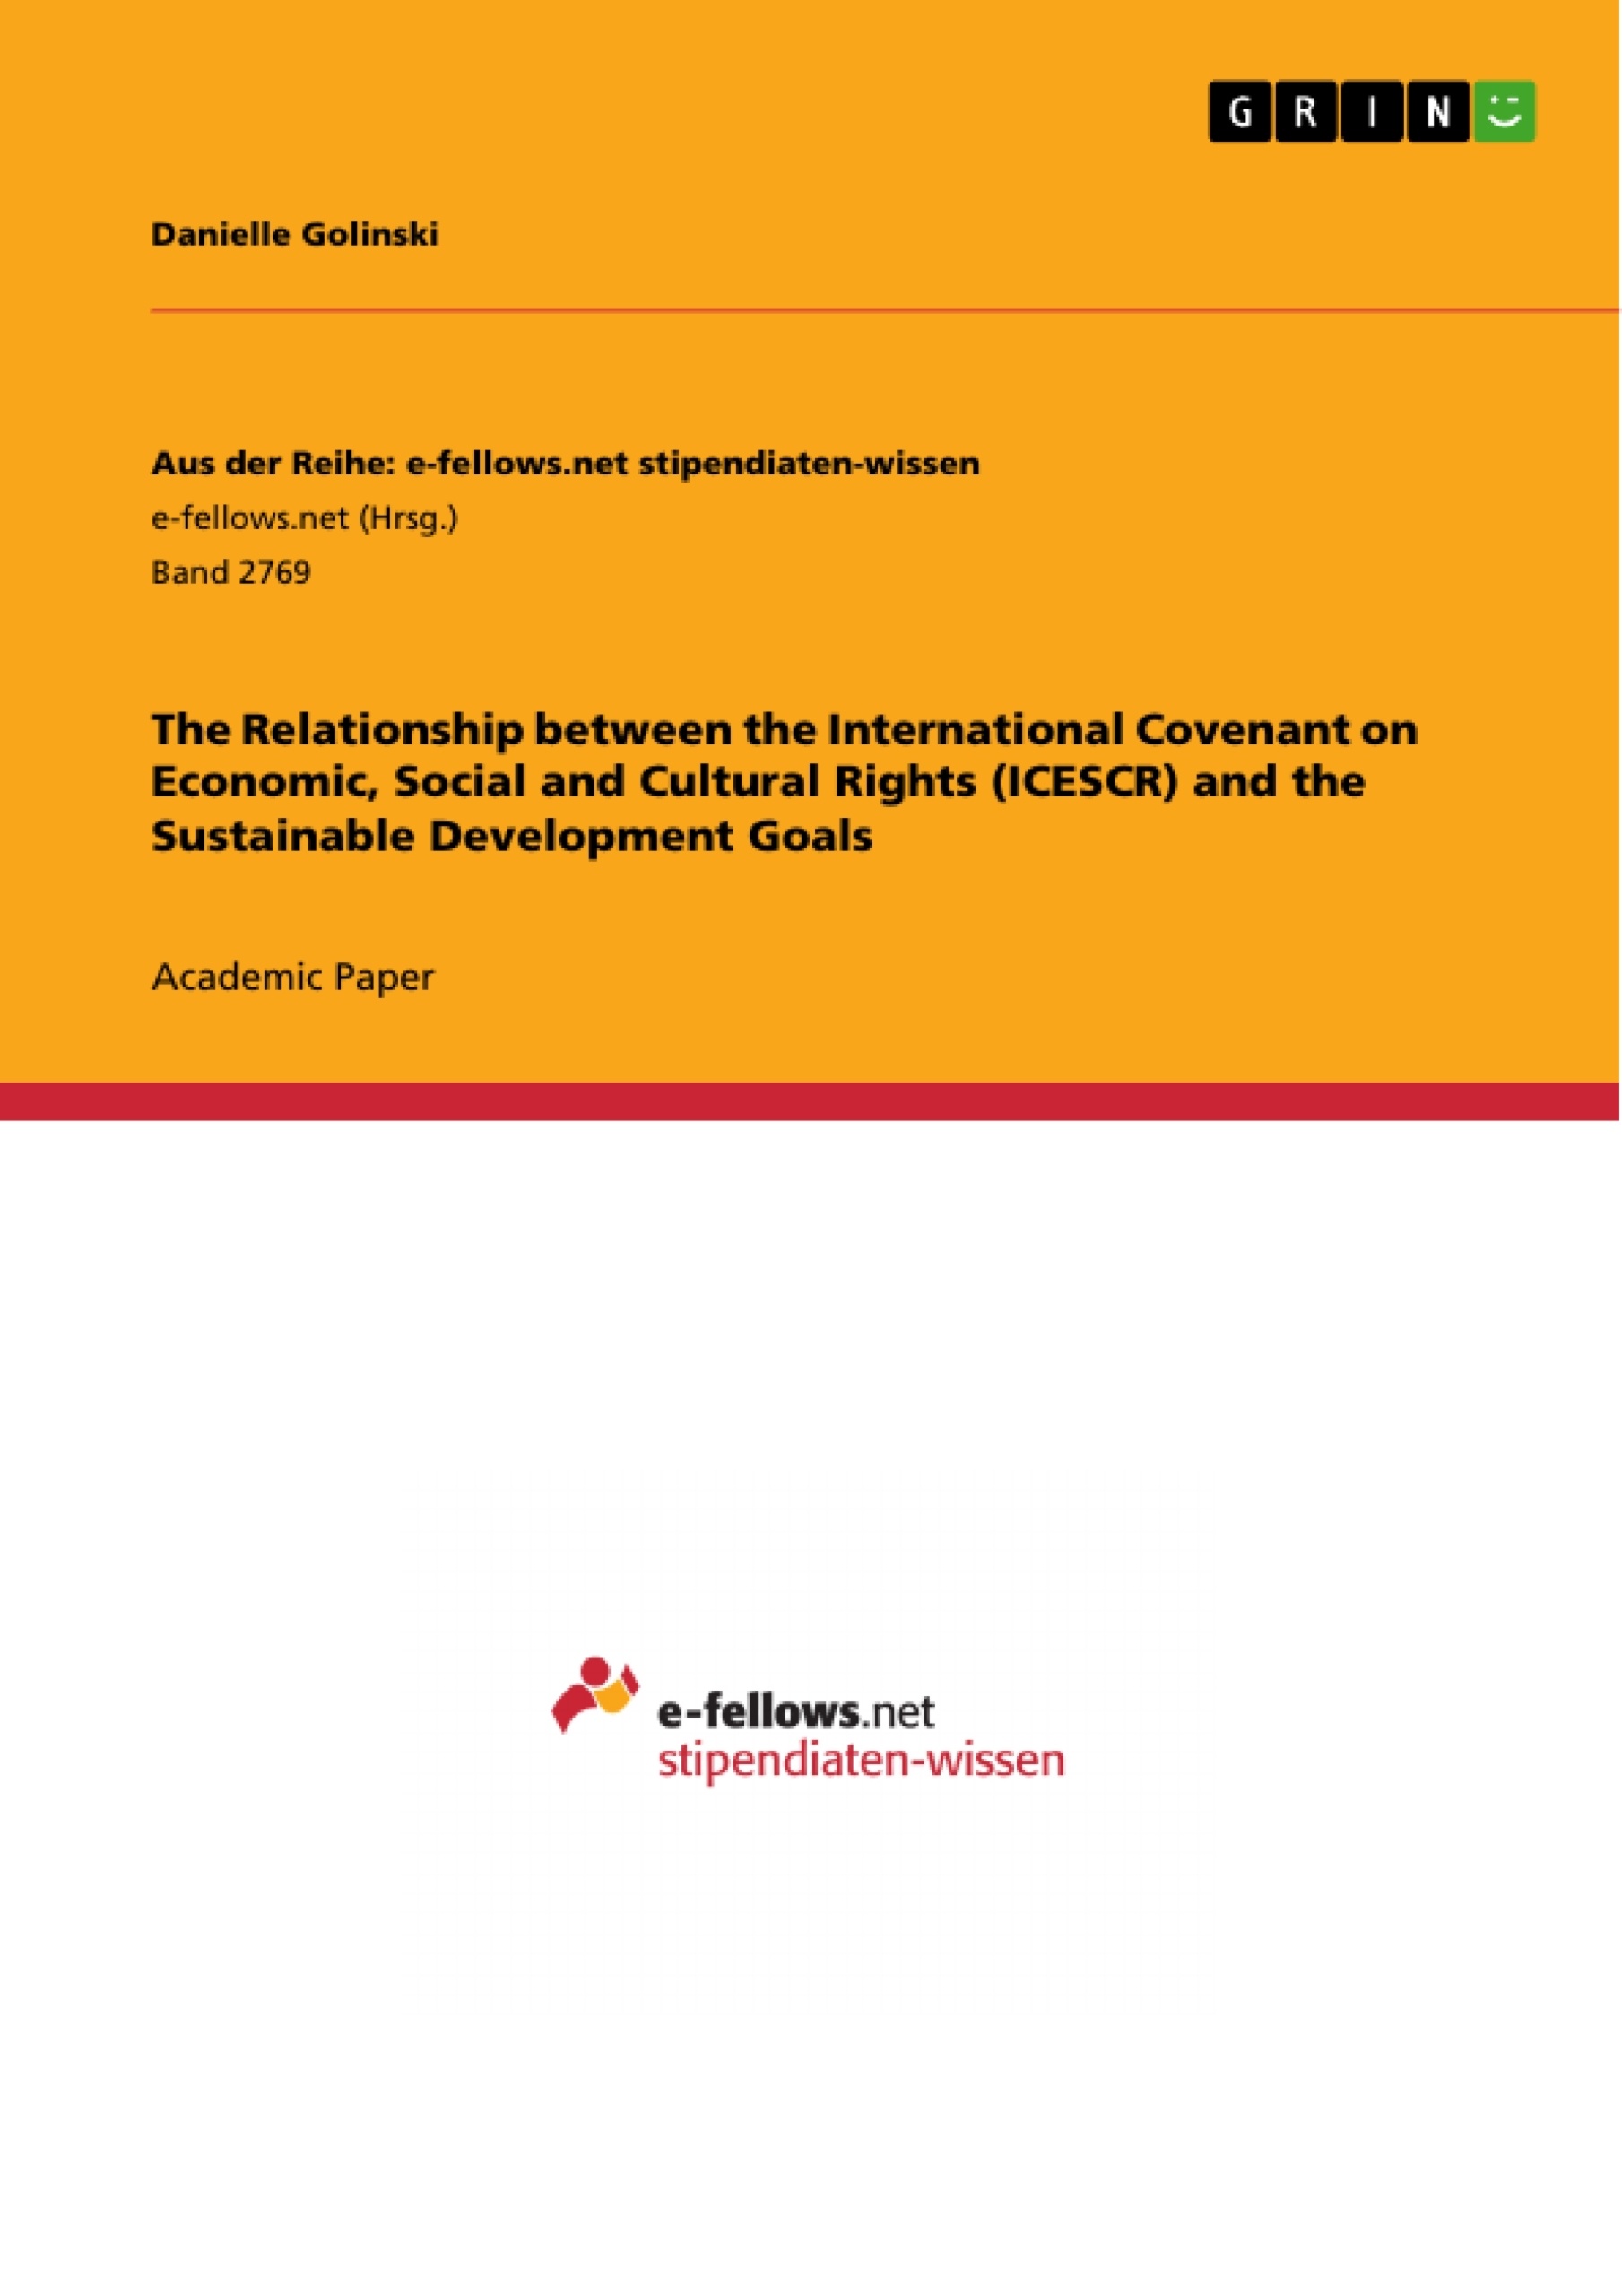 Title: The Relationship between the International Covenant on Economic, Social and Cultural Rights (ICESCR) and the Sustainable Development Goals